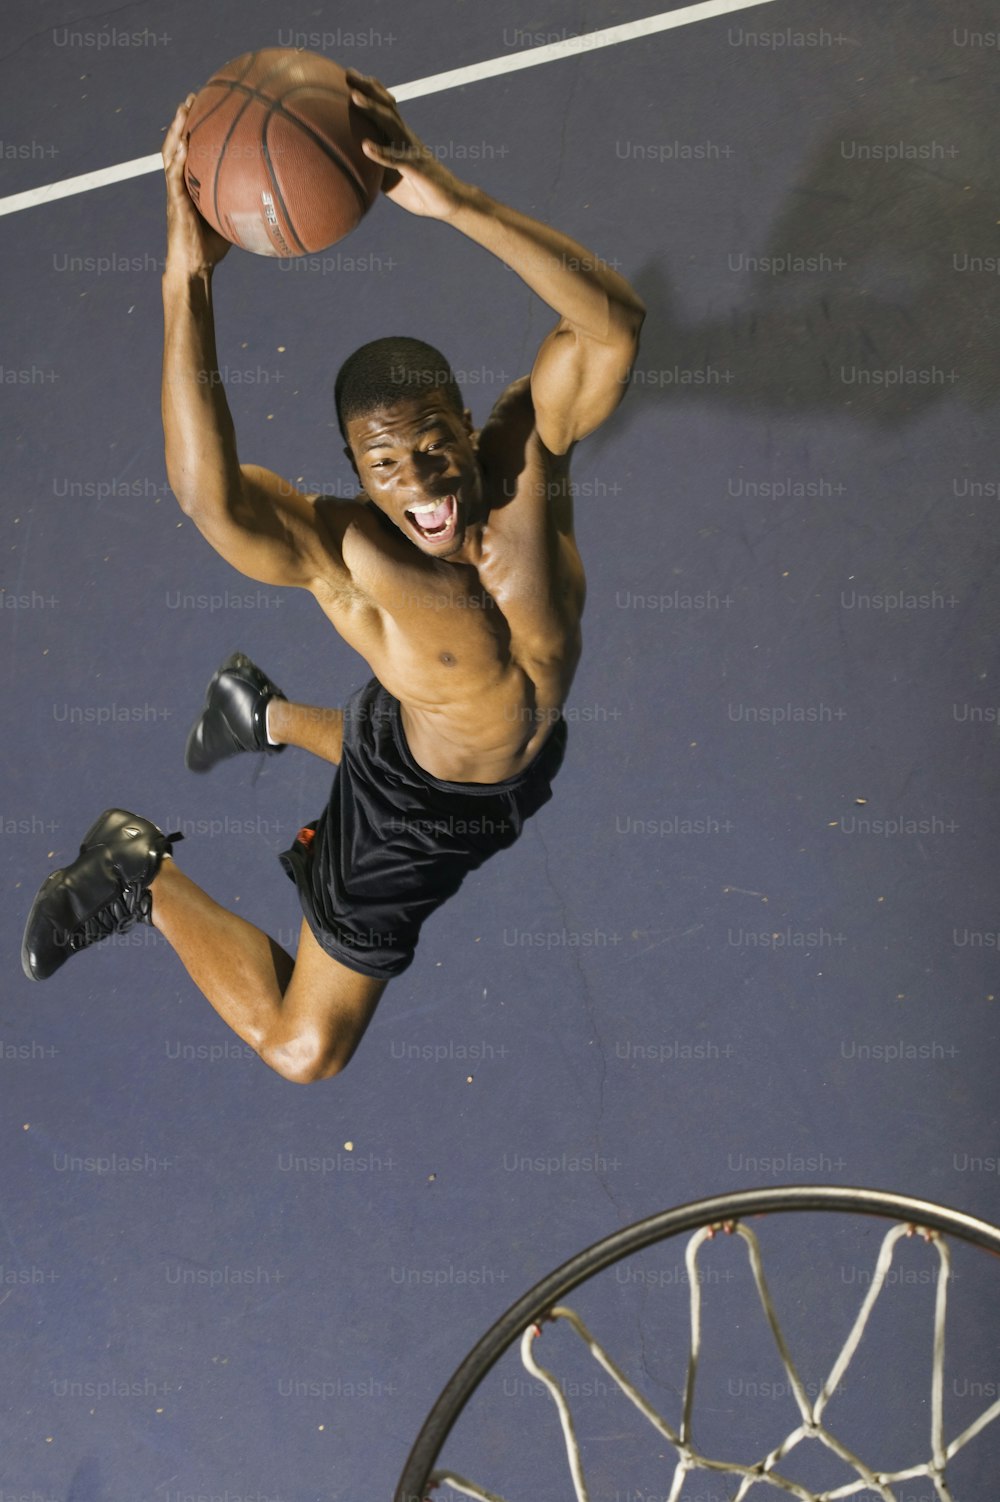 a man is jumping up to dunk a basketball